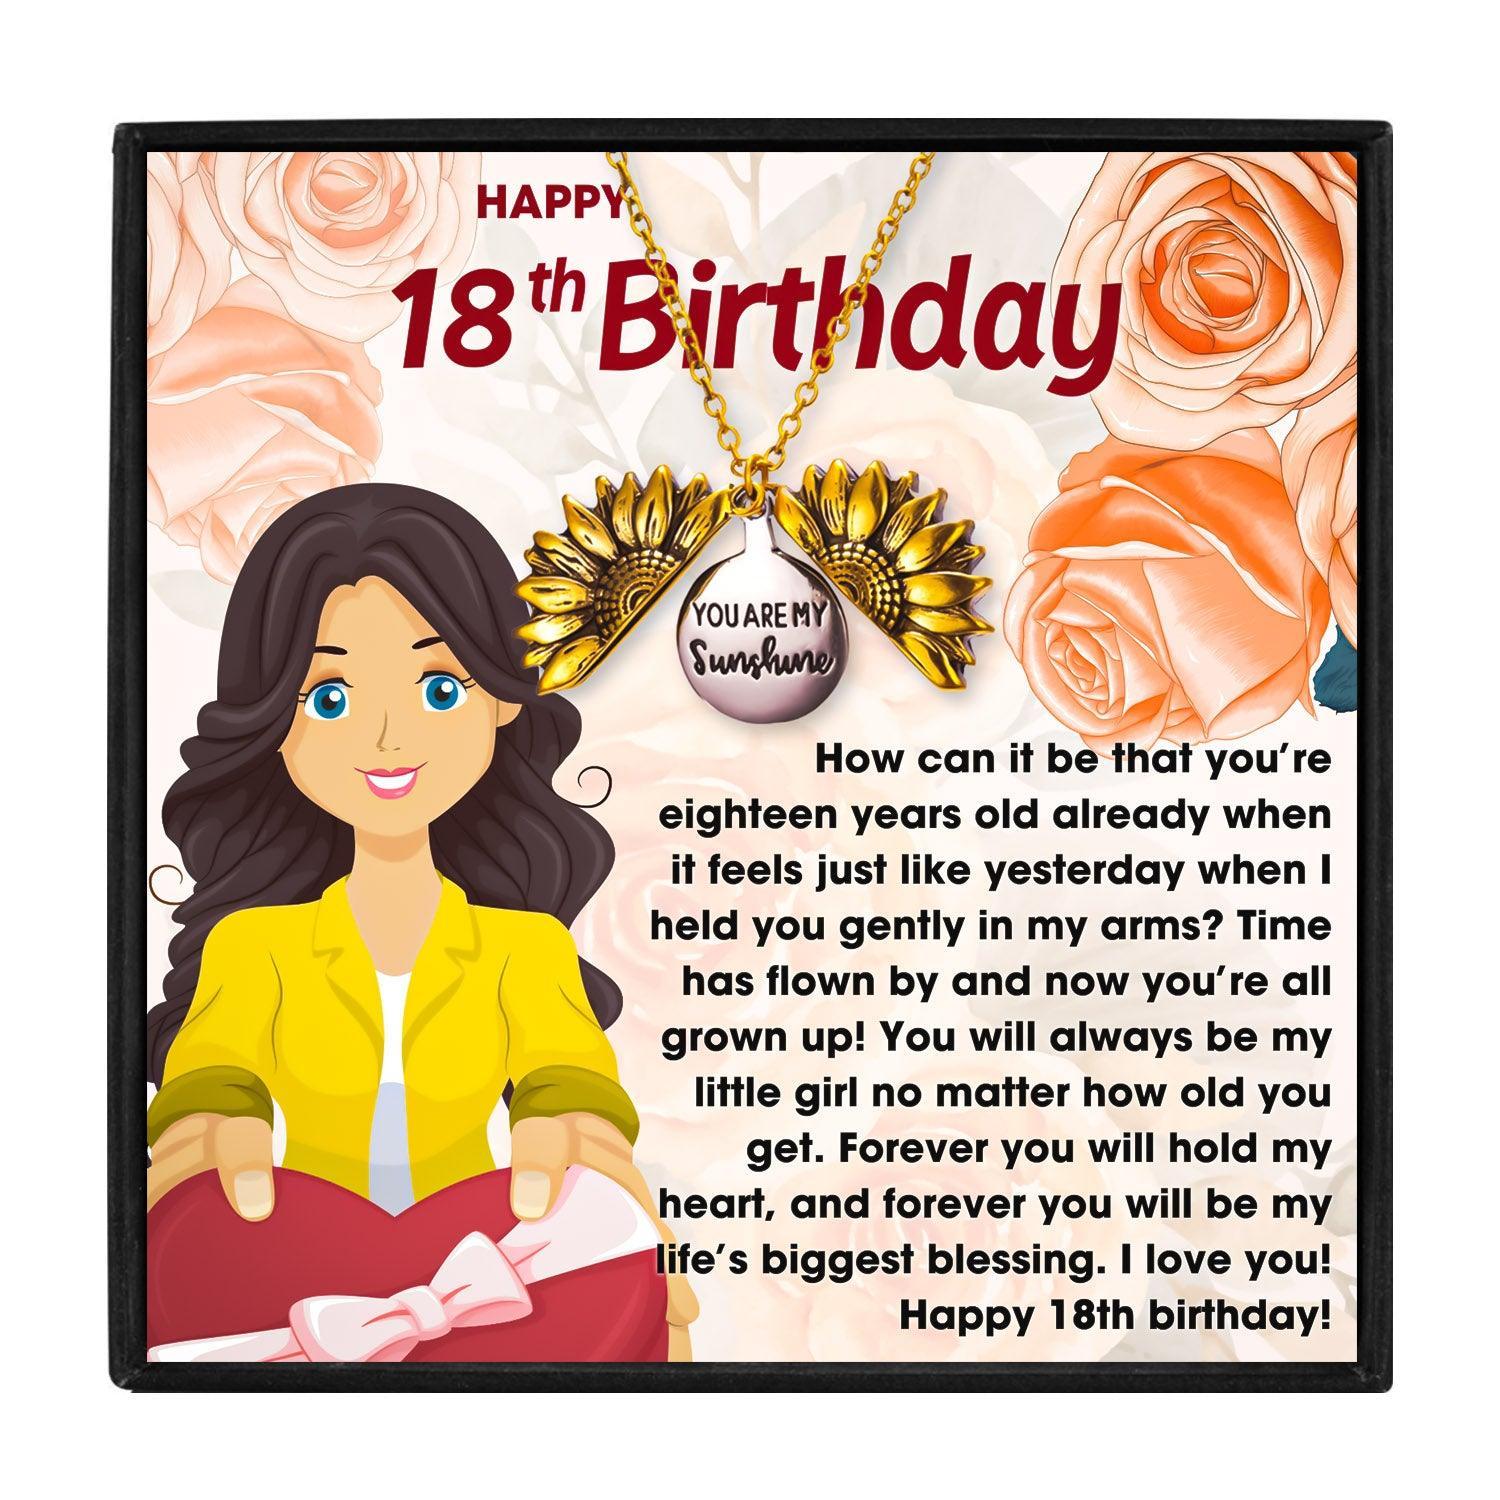 18th Birthday Gift Ideas for a Brand New Adult in 2023 | 18th Birthday Gift Ideas for a Brand New Adult - undefined | 18th birthday gifts for daughter, 18th birthday ideas for daughter, 18th birthday necklace, 18th birthday present ideas | From Hunny Life | hunnylife.com